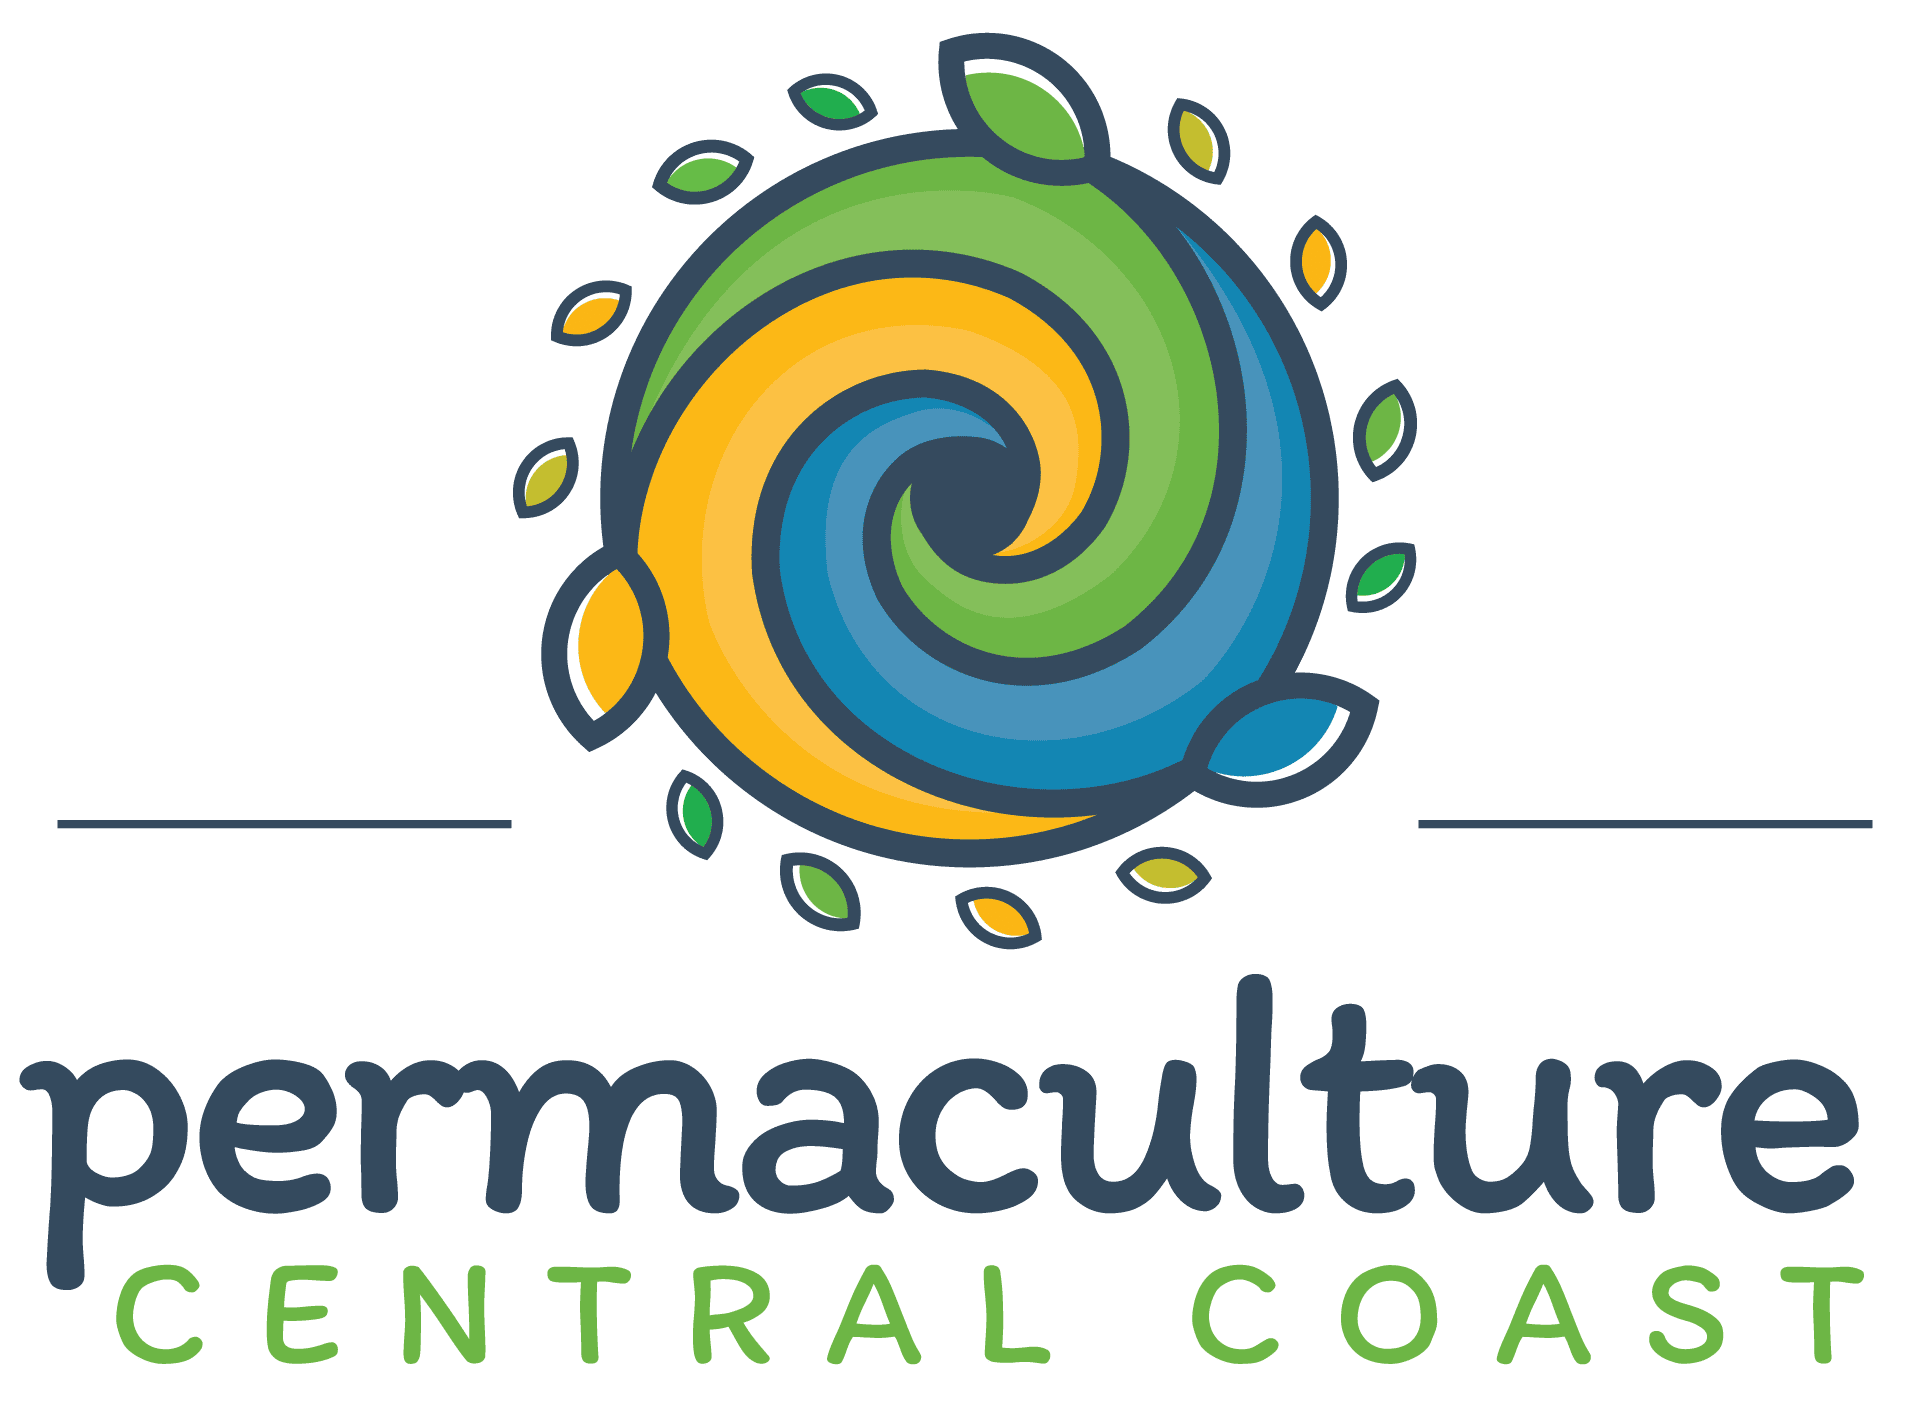 Permaculture Central Coast logo